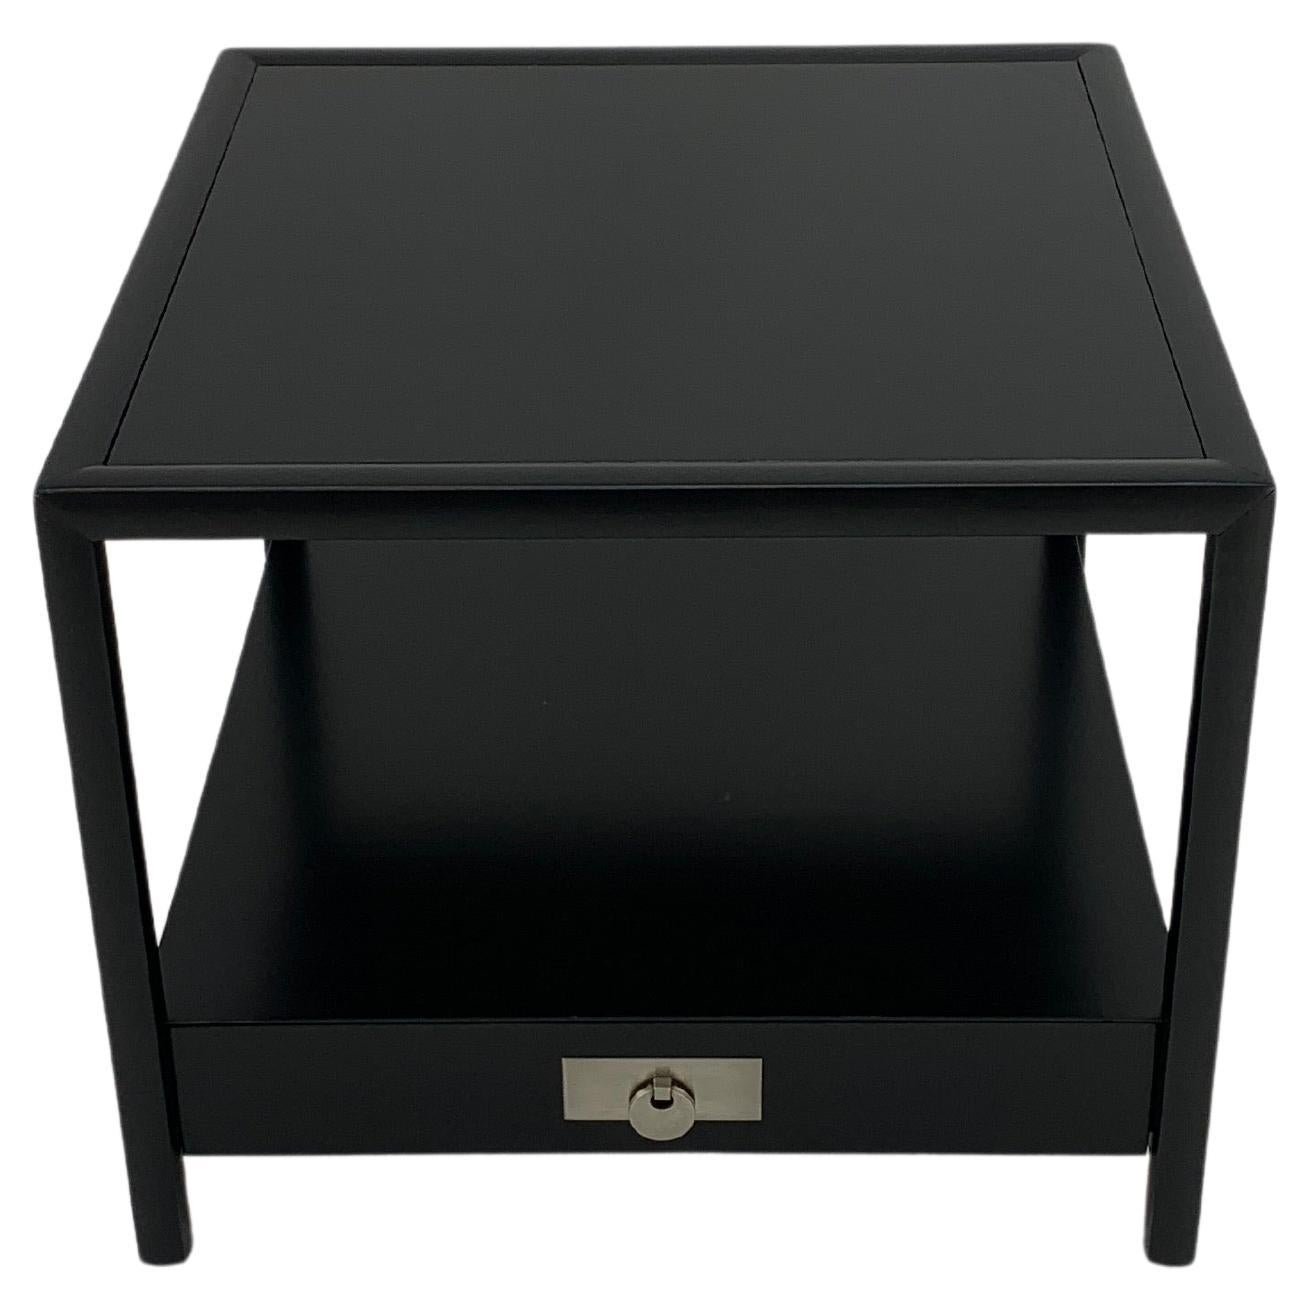 Baker Black Lacquer One Drawer Two Tier Square Side End Table Night Stand MINT!
Mint inspected vintage condition.